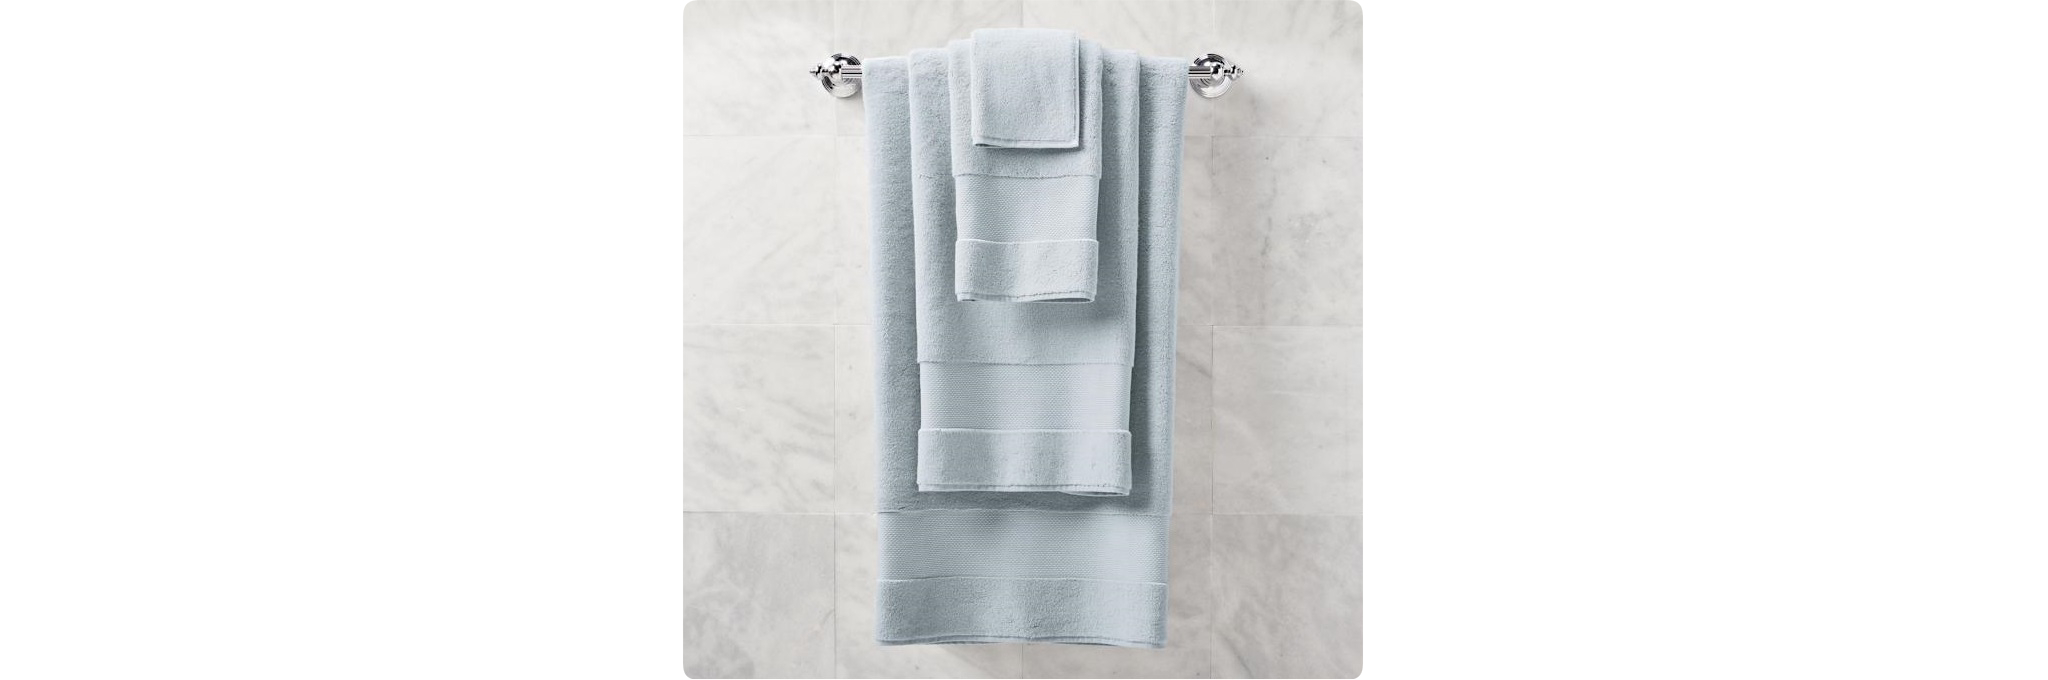 Multiple towels placed one on top of the other on a single towel bar